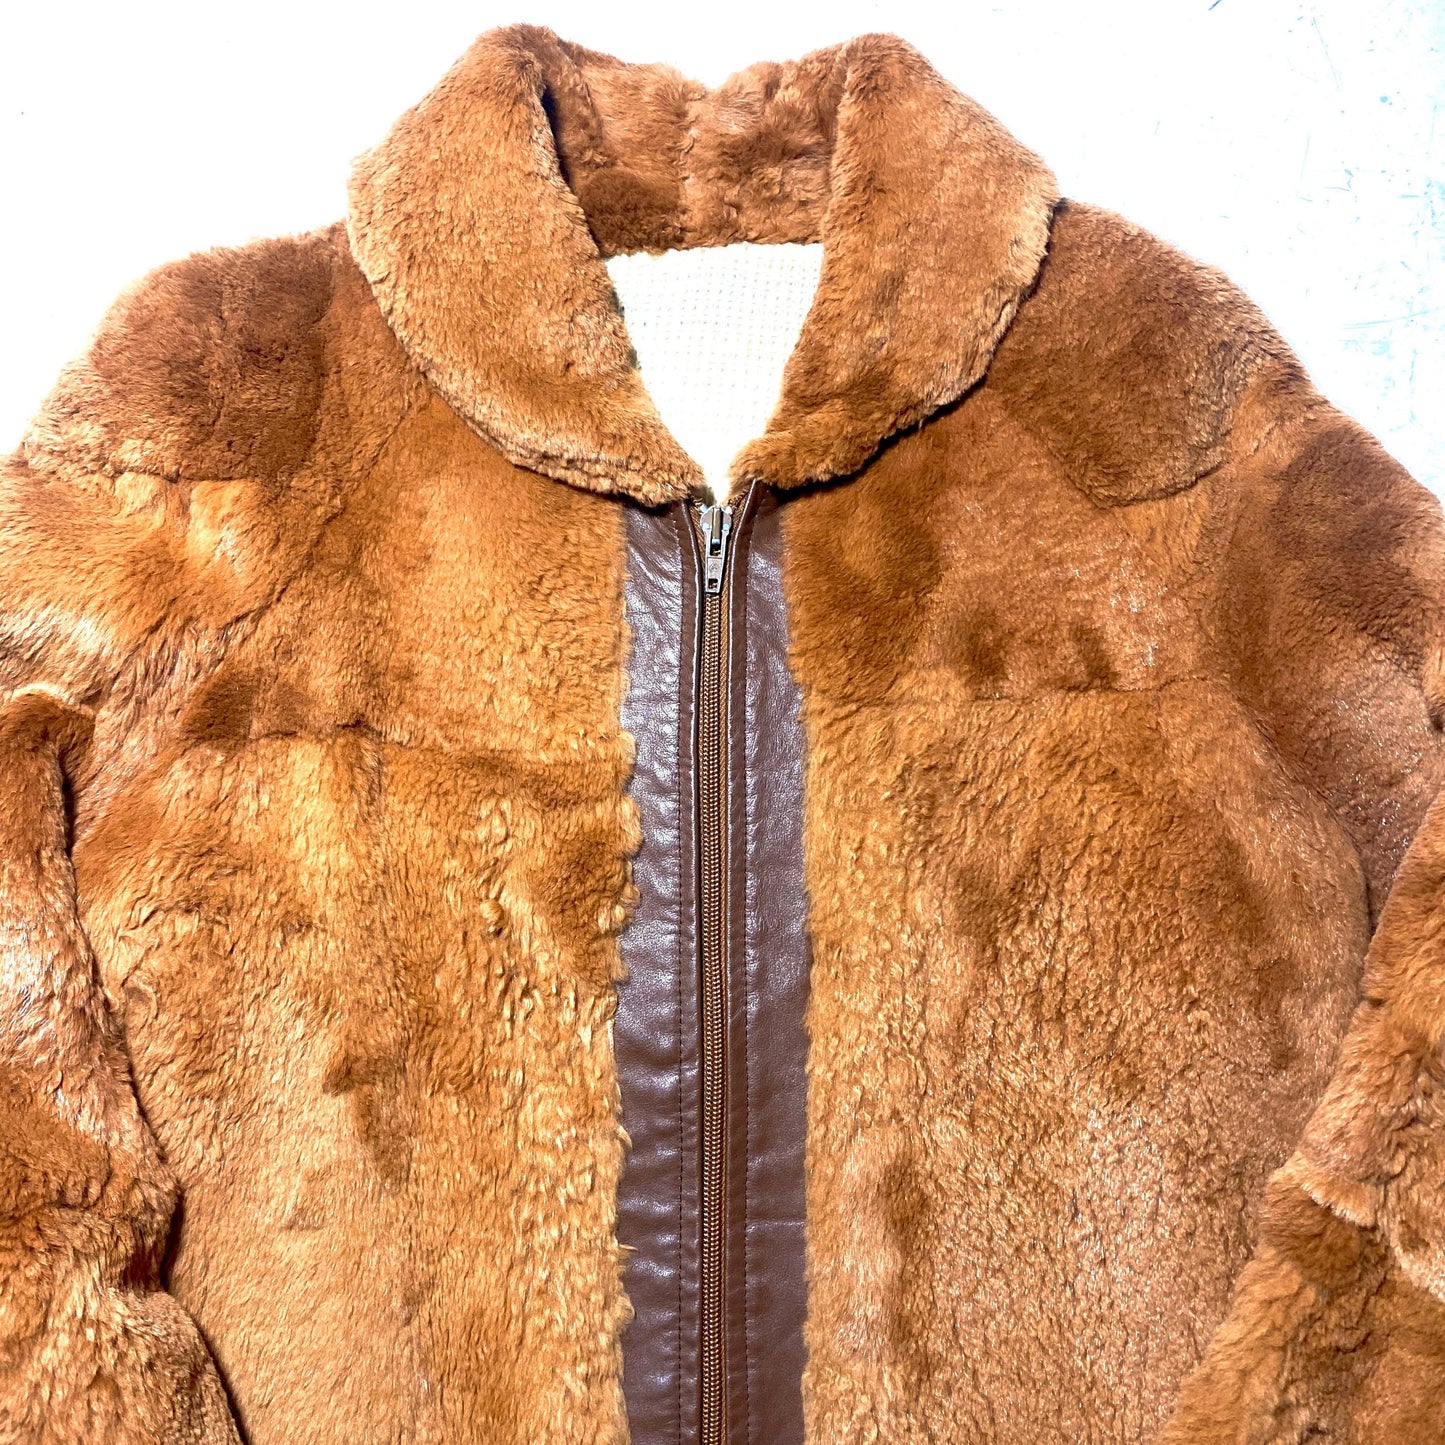 Scoat 1970s real fur fox brown short hair coat with brown leather details. super warm and nicely tailored